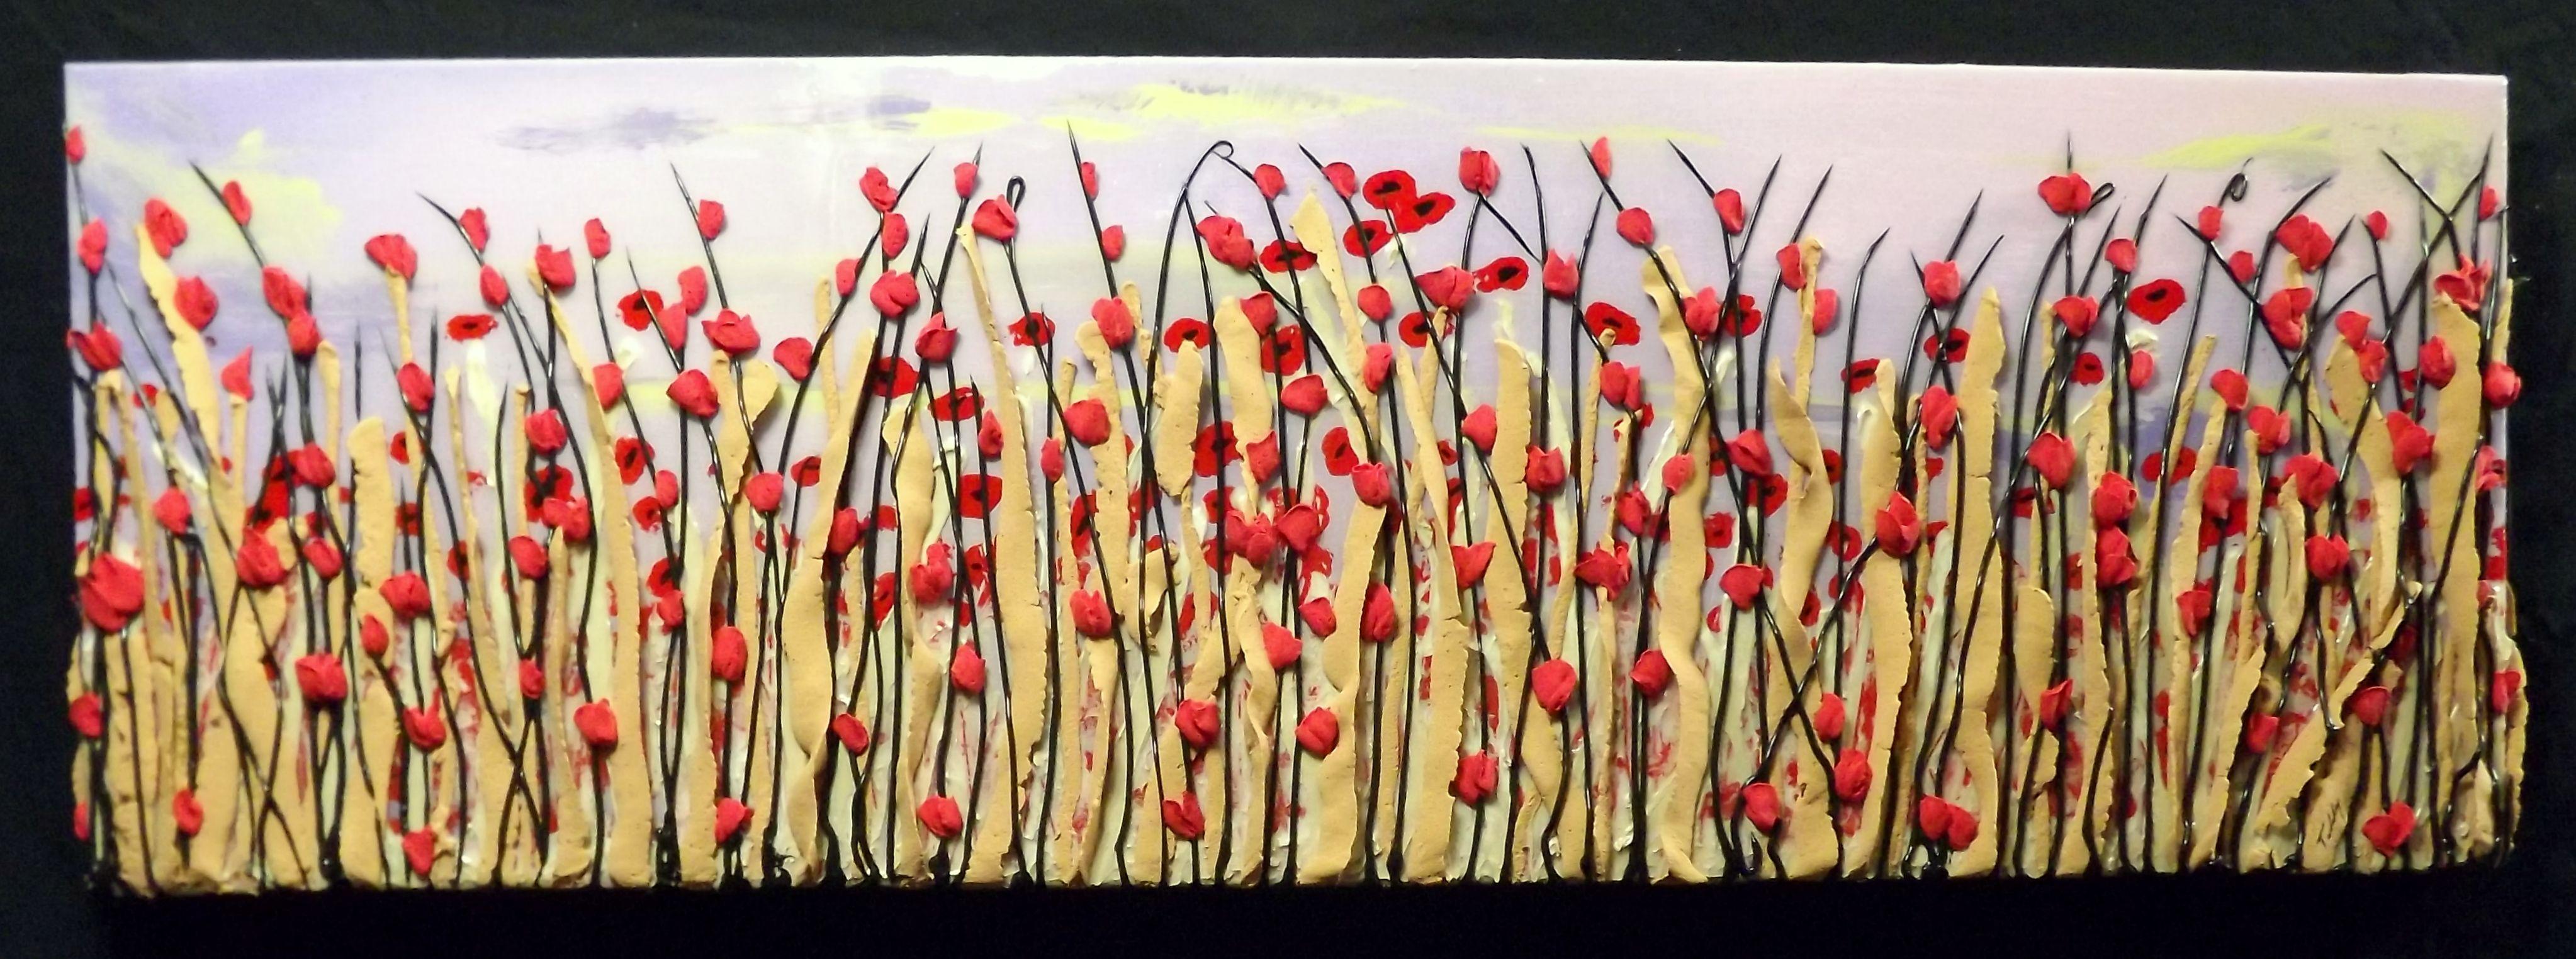 Red Poppies, Mixed Media on Canvas - Impressionist Mixed Media Art by Teddy Brown